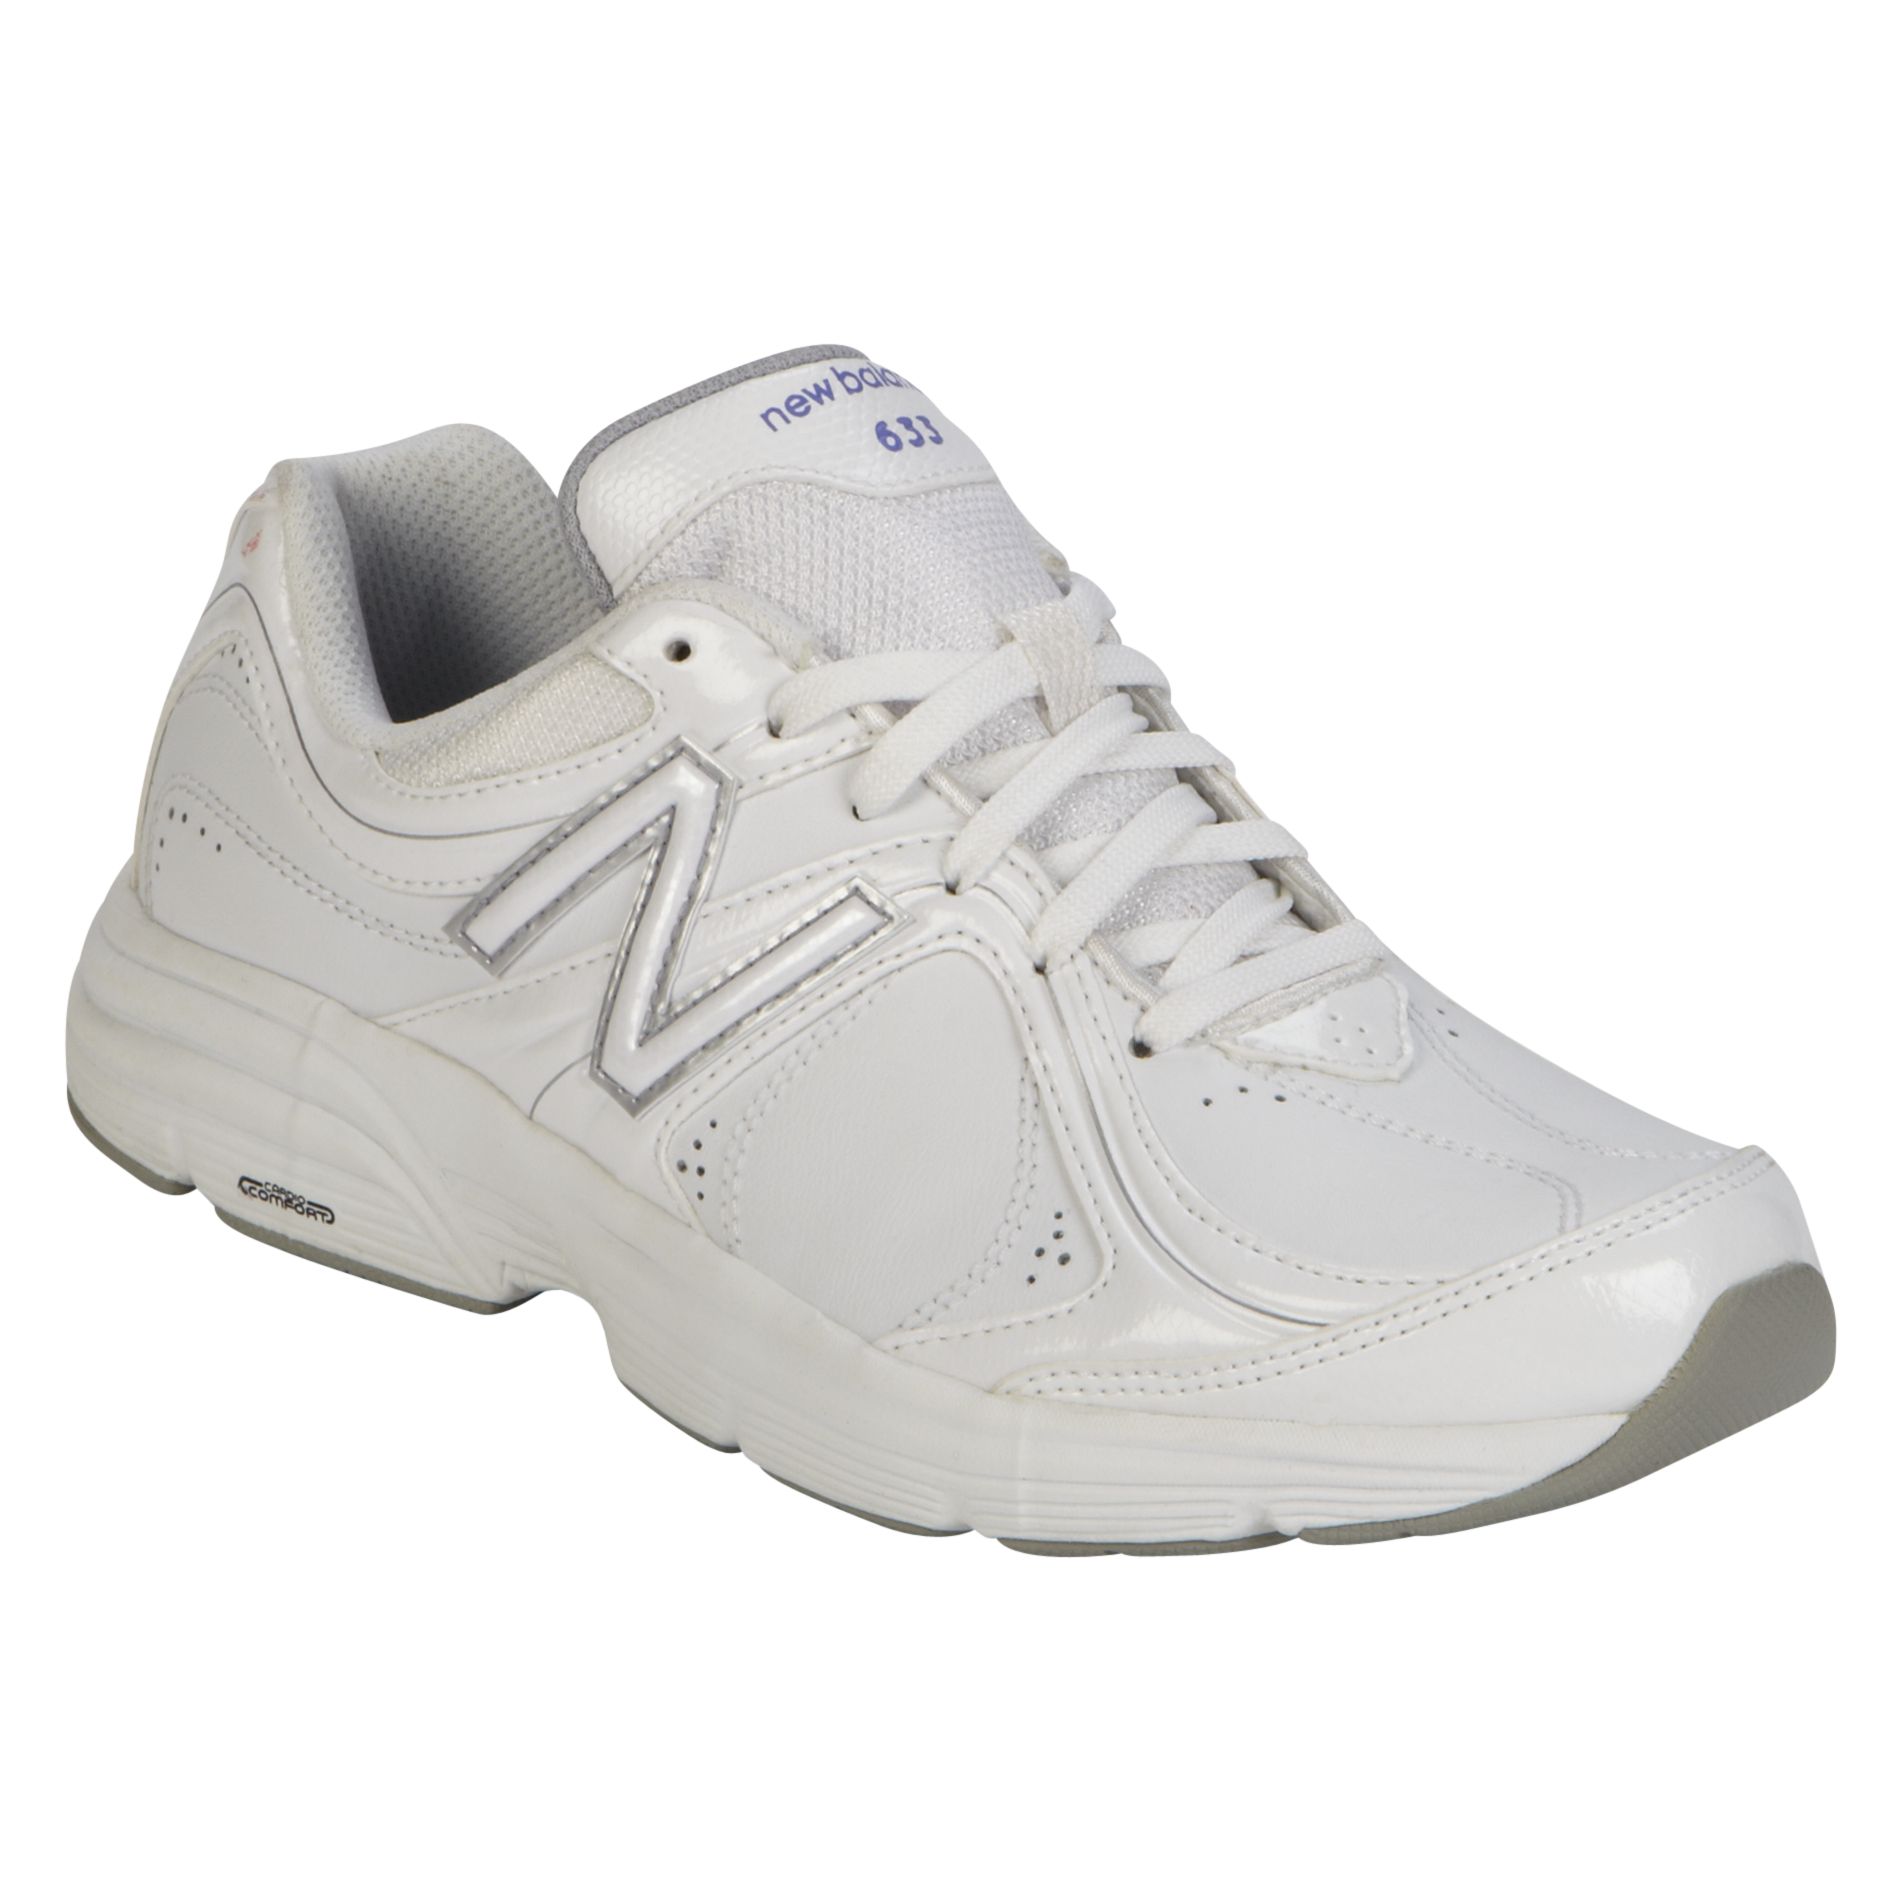 Women's Leather Cross Training Shoe: Go Further with Sears